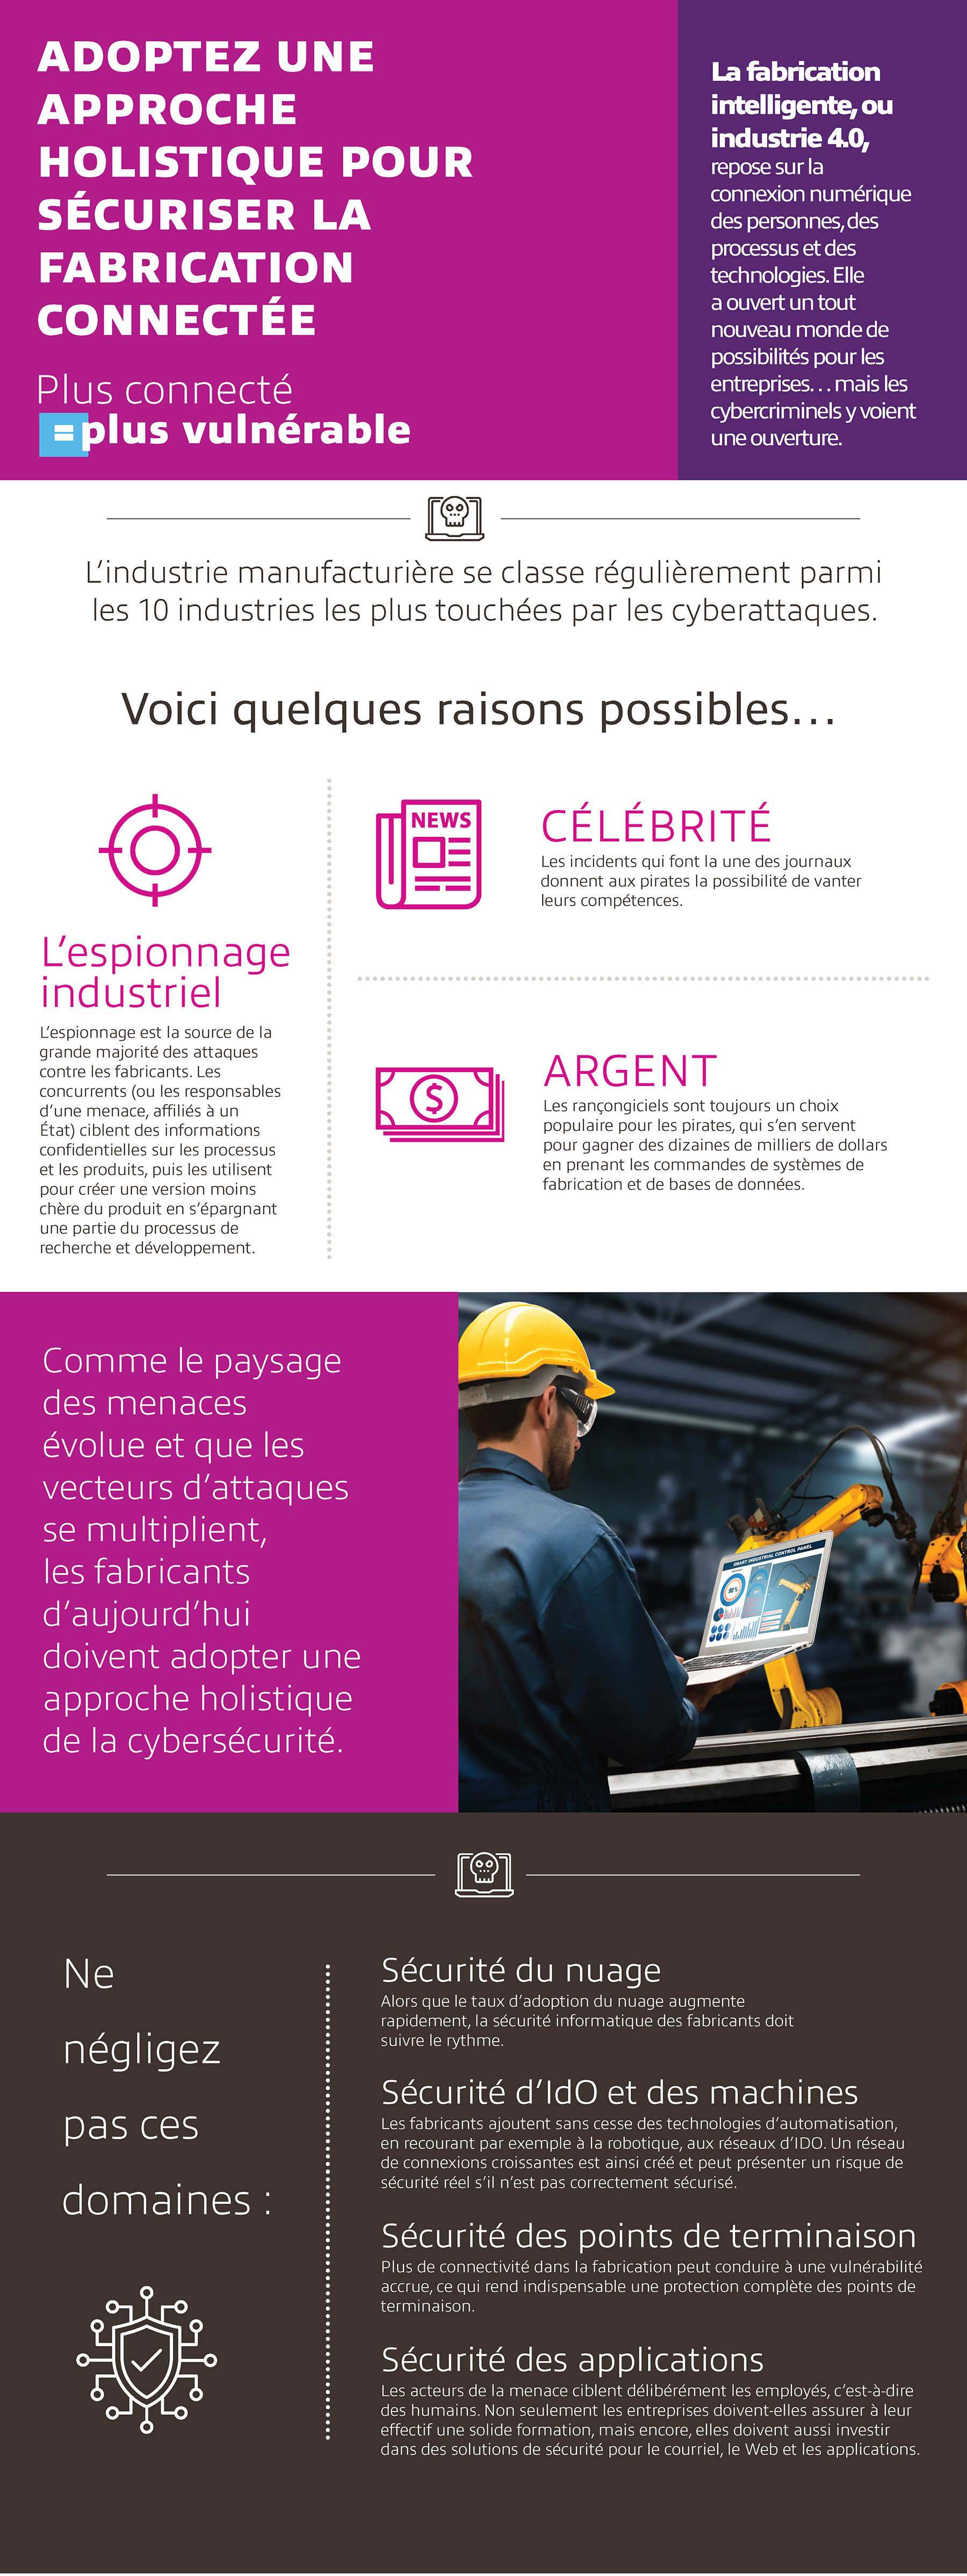 Holistic Approach to Securing Manufacturing infographic